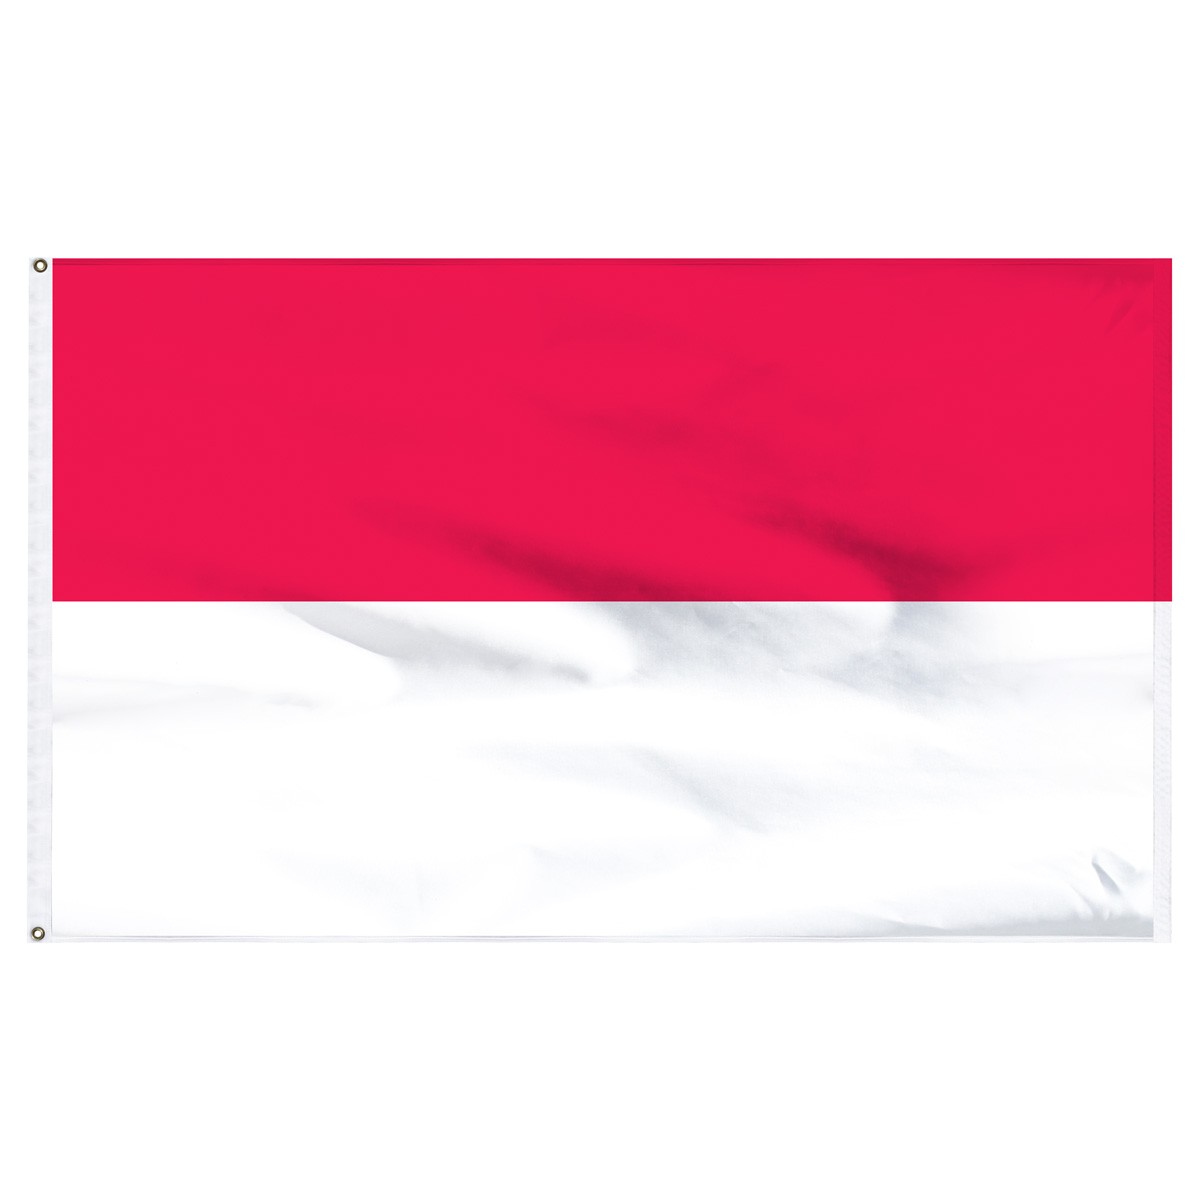 Indonesia Swallow Pennant Flag